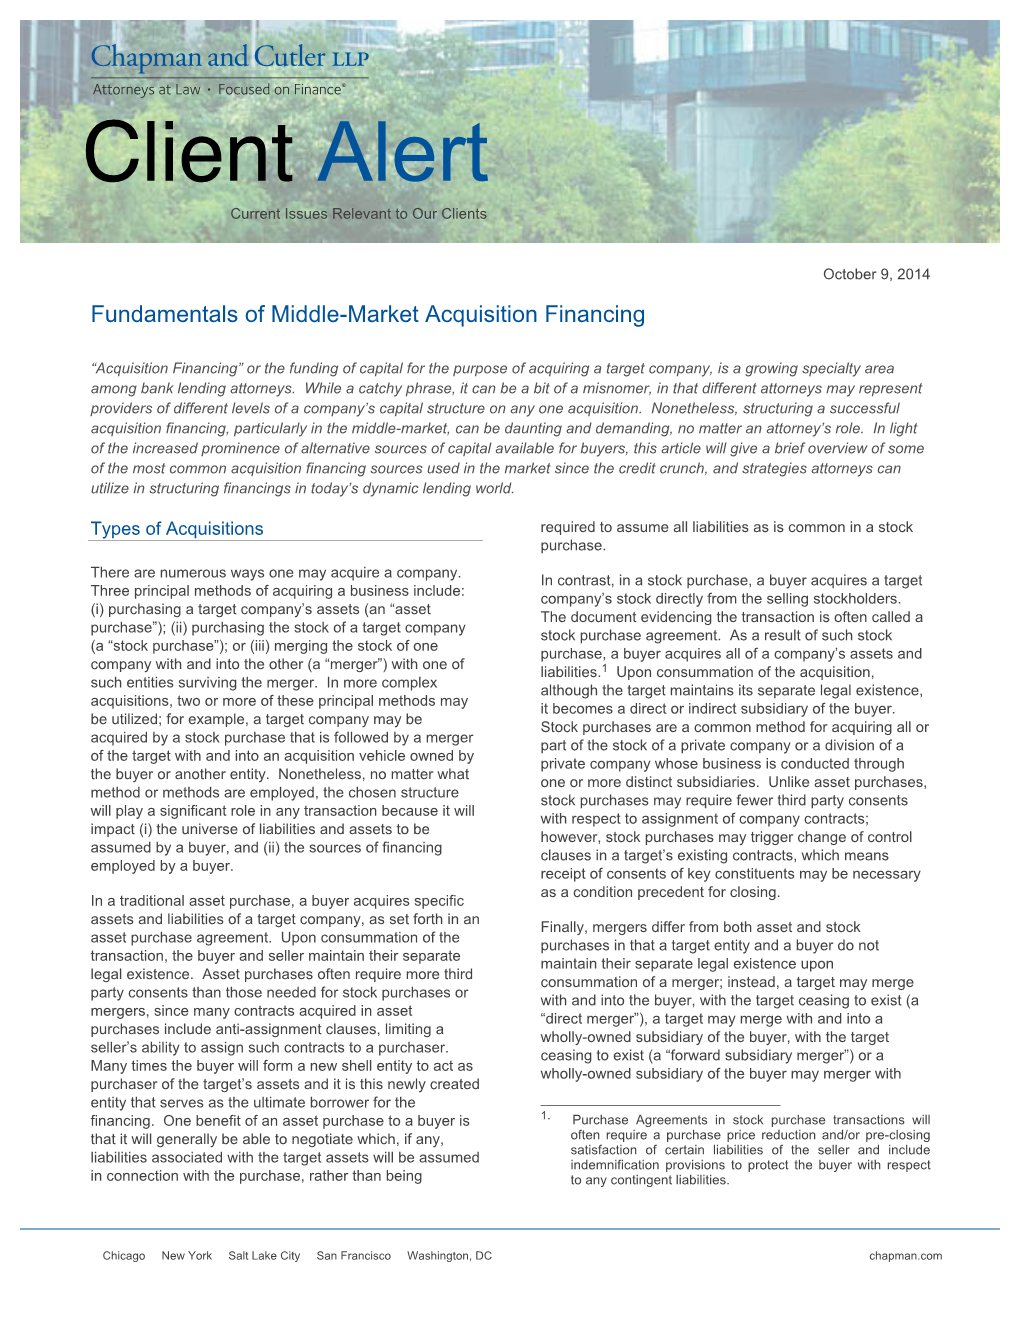 Client Alert Current Issues Relevant to Our Clients